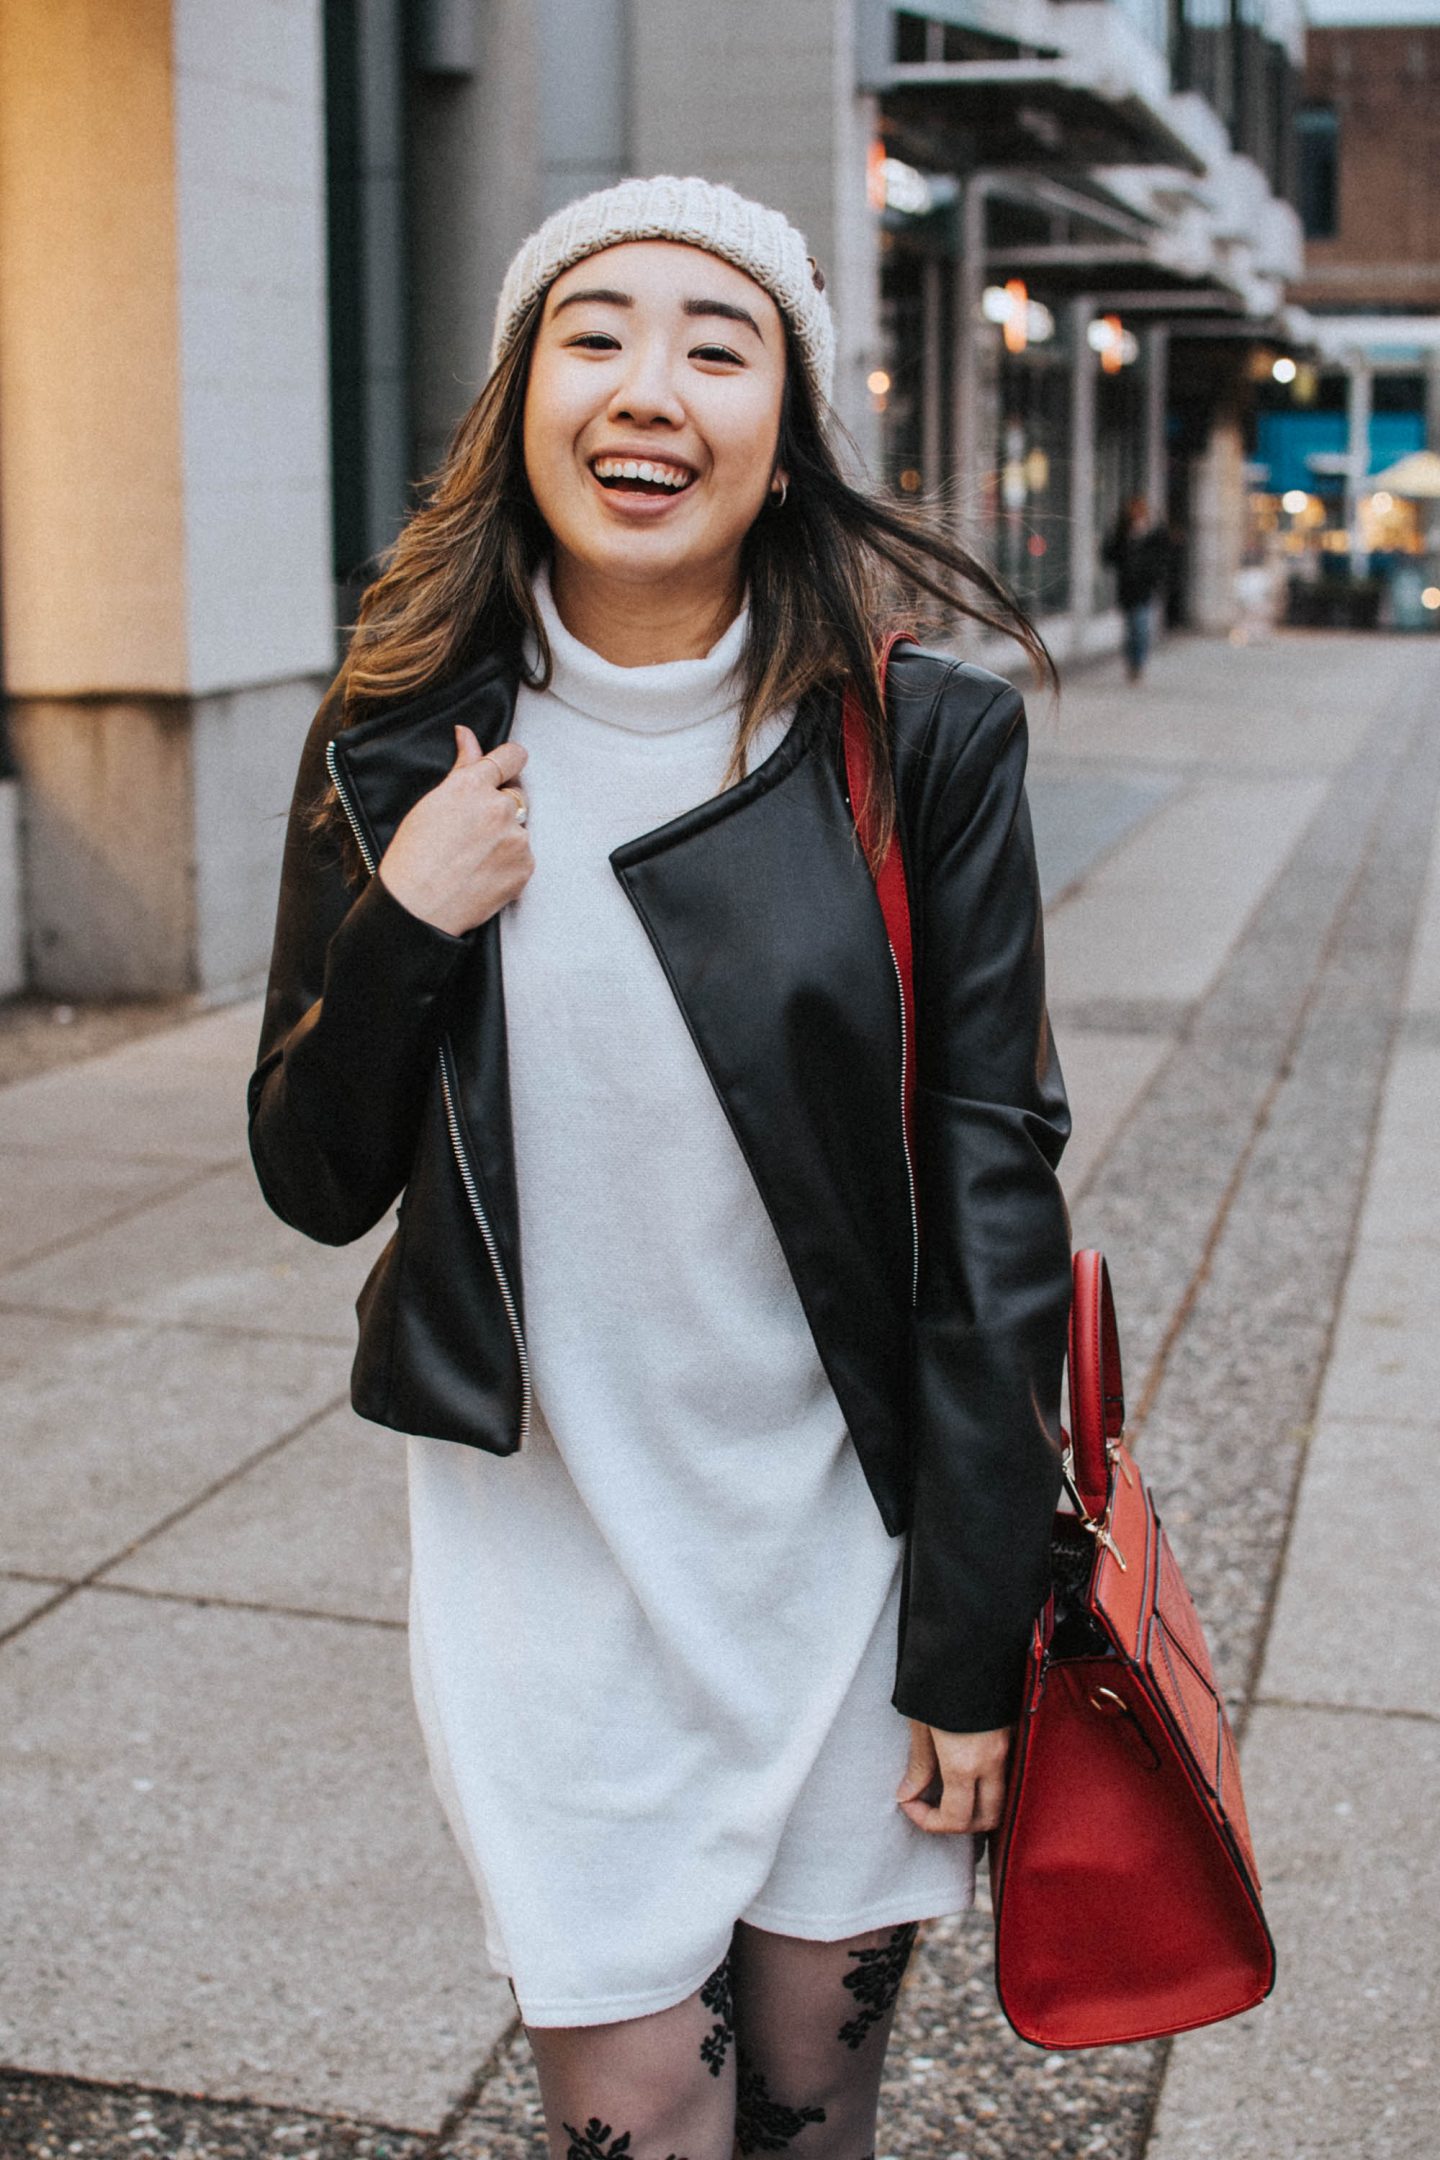 Fall trends to try: Toque with PomPom paired with my moto jacket and grey dress